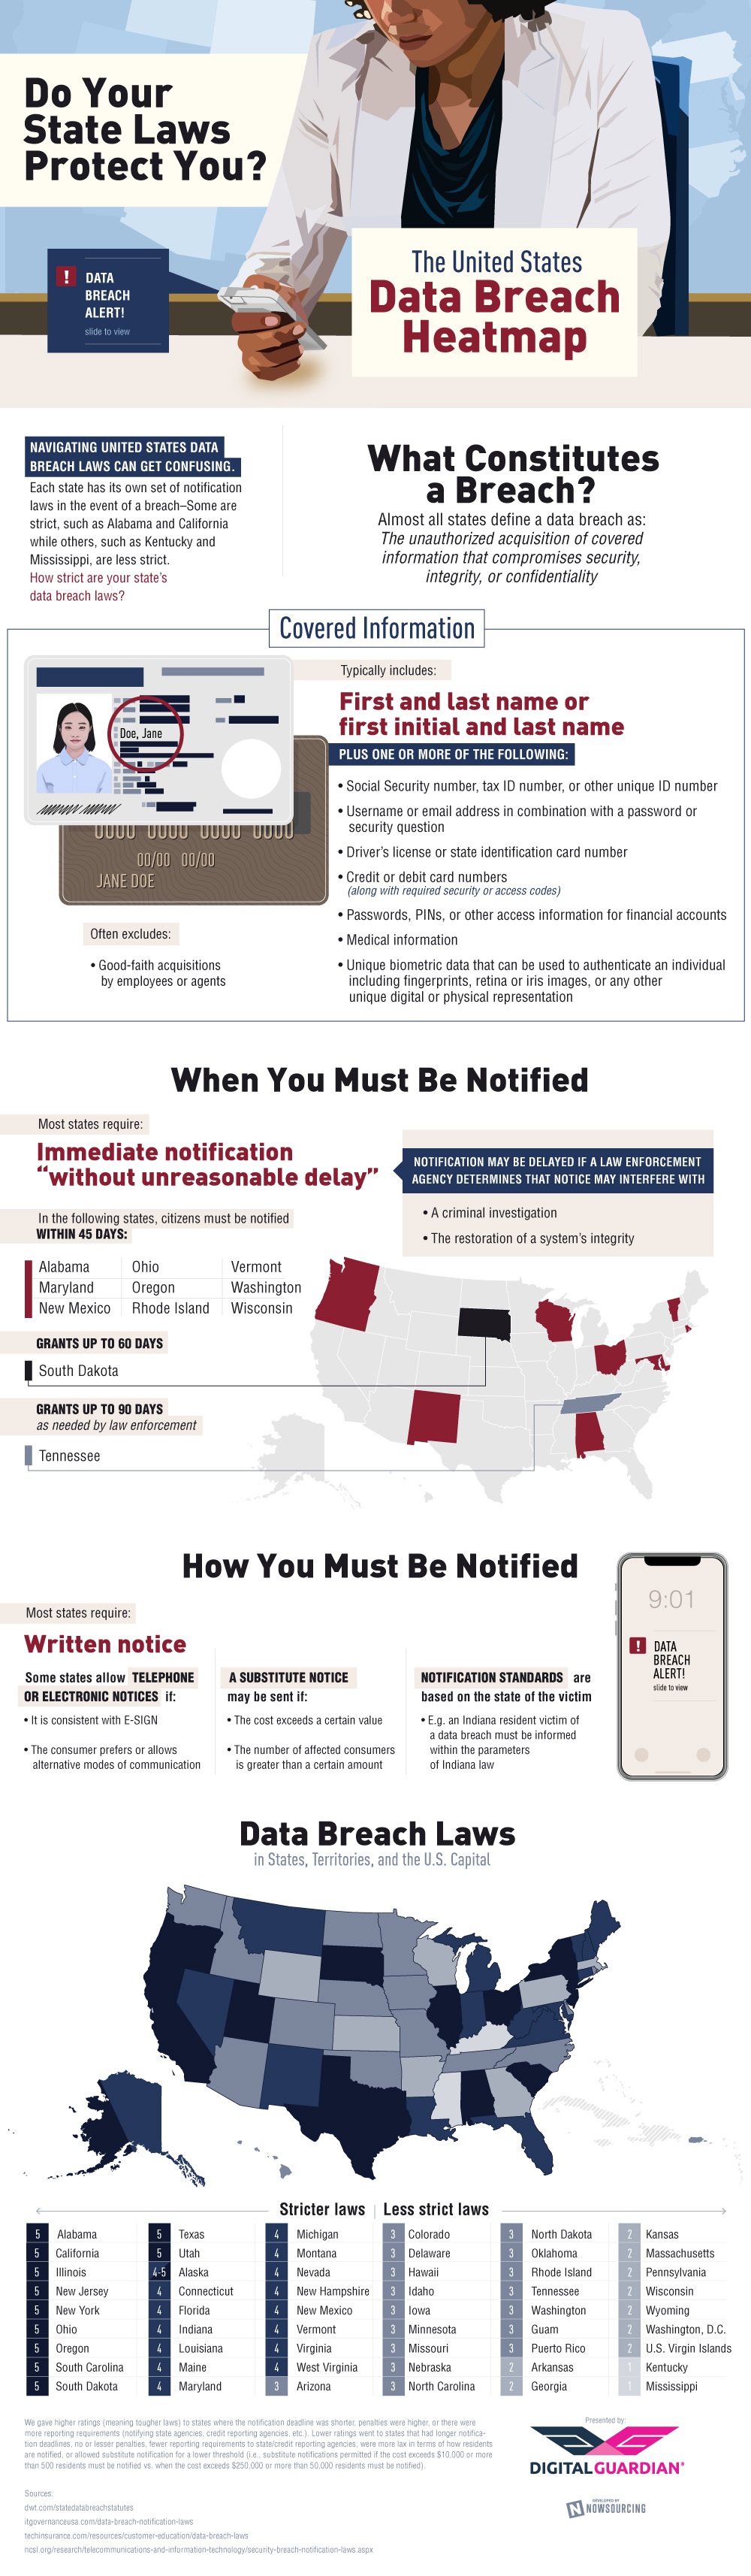 Do Your State Laws Protect You? The United States Data Breach Heatmap Infographic